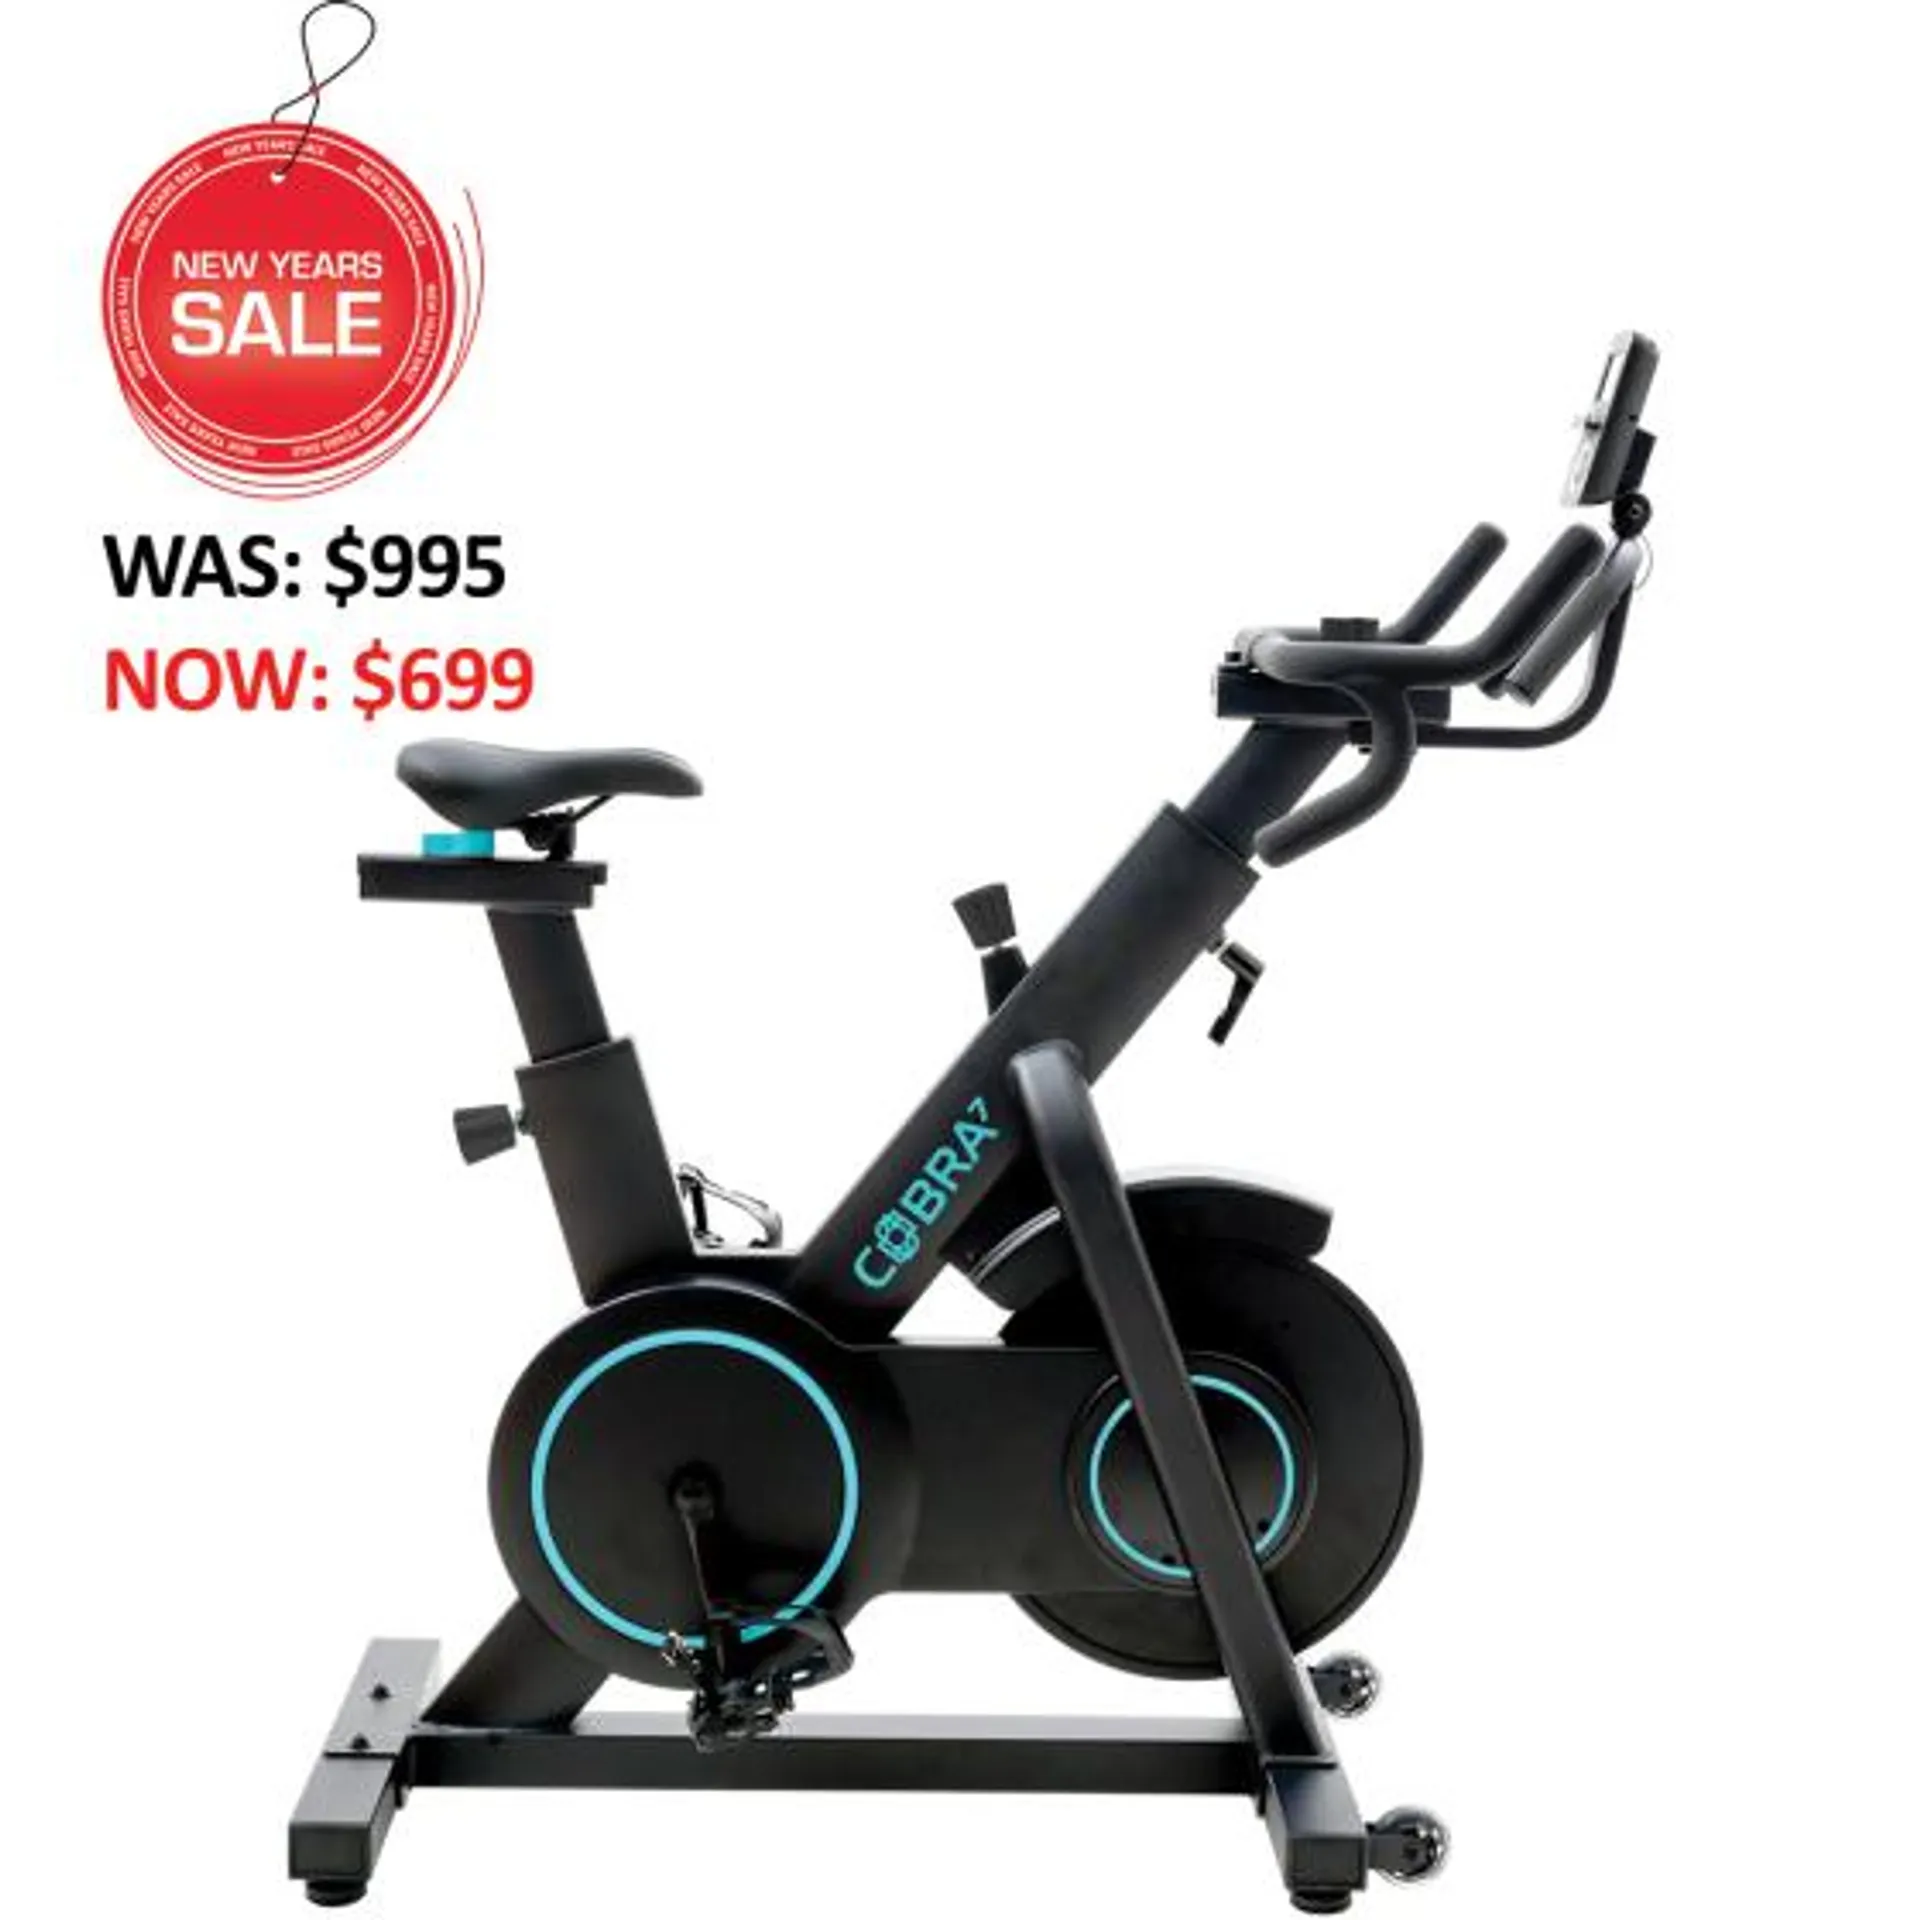 COBRA 7 SPIN BIKE CLEARANCE- AVAILABLE IN QUEENSTOWN